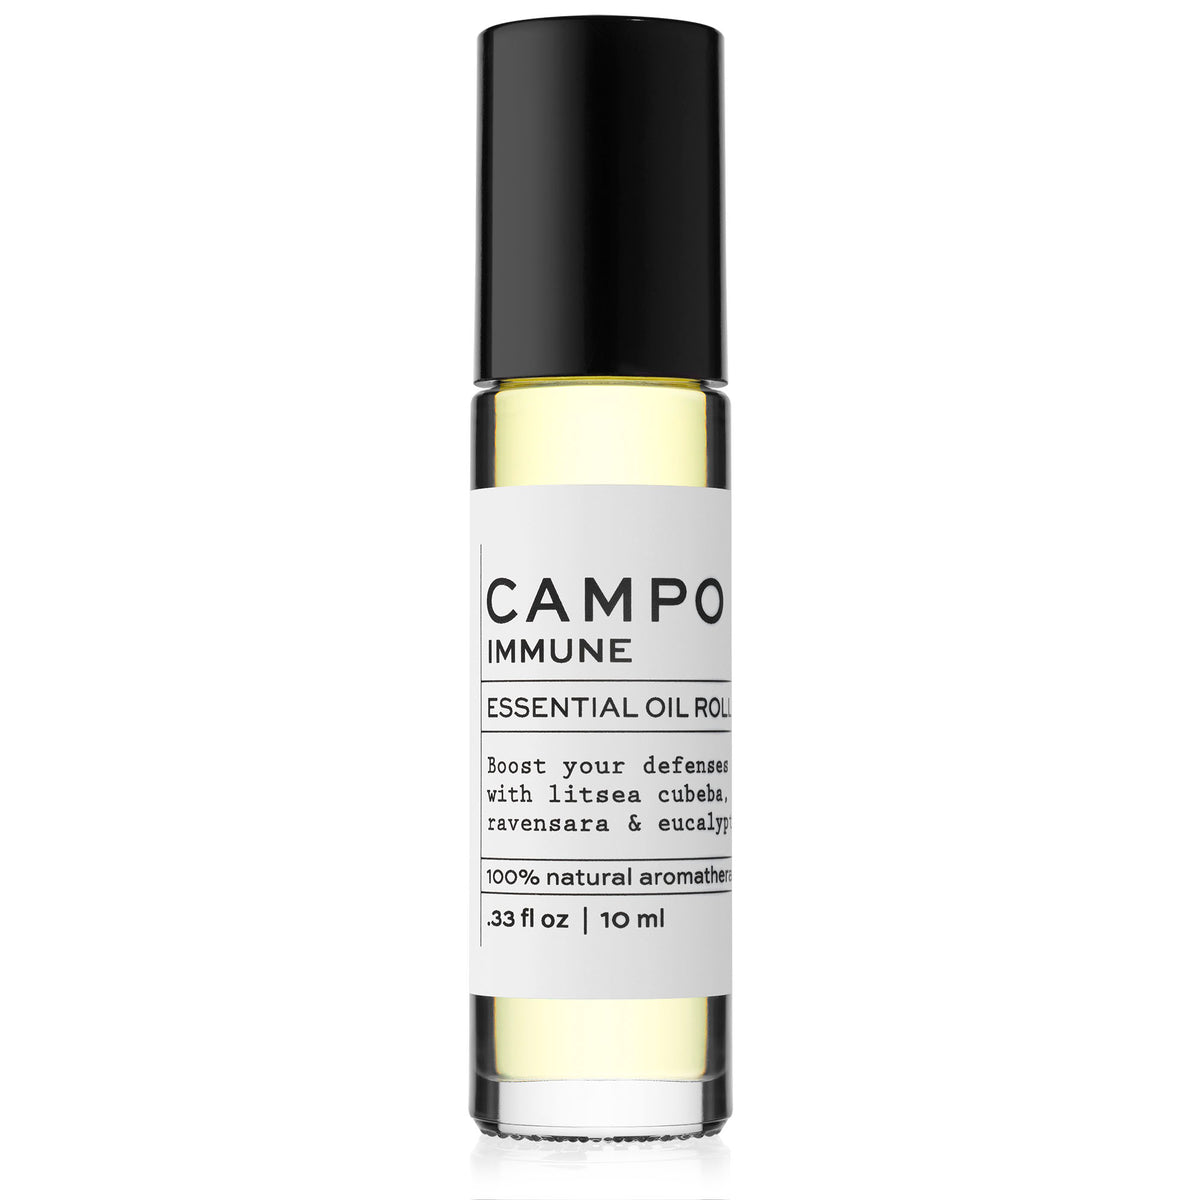 Campo Beauty Essential Oil IMMUNE Blend Roll-On that in 10 ml. Boost your defenses naturally. Help support your body’s natural defenses with this 100% natural essential oil roll-on blend of Litsea Cubeba, Ravensara &amp; Eucalyptus. Pre-blended with 100% natural beauty carrier oils. Jet set and ready to roll.